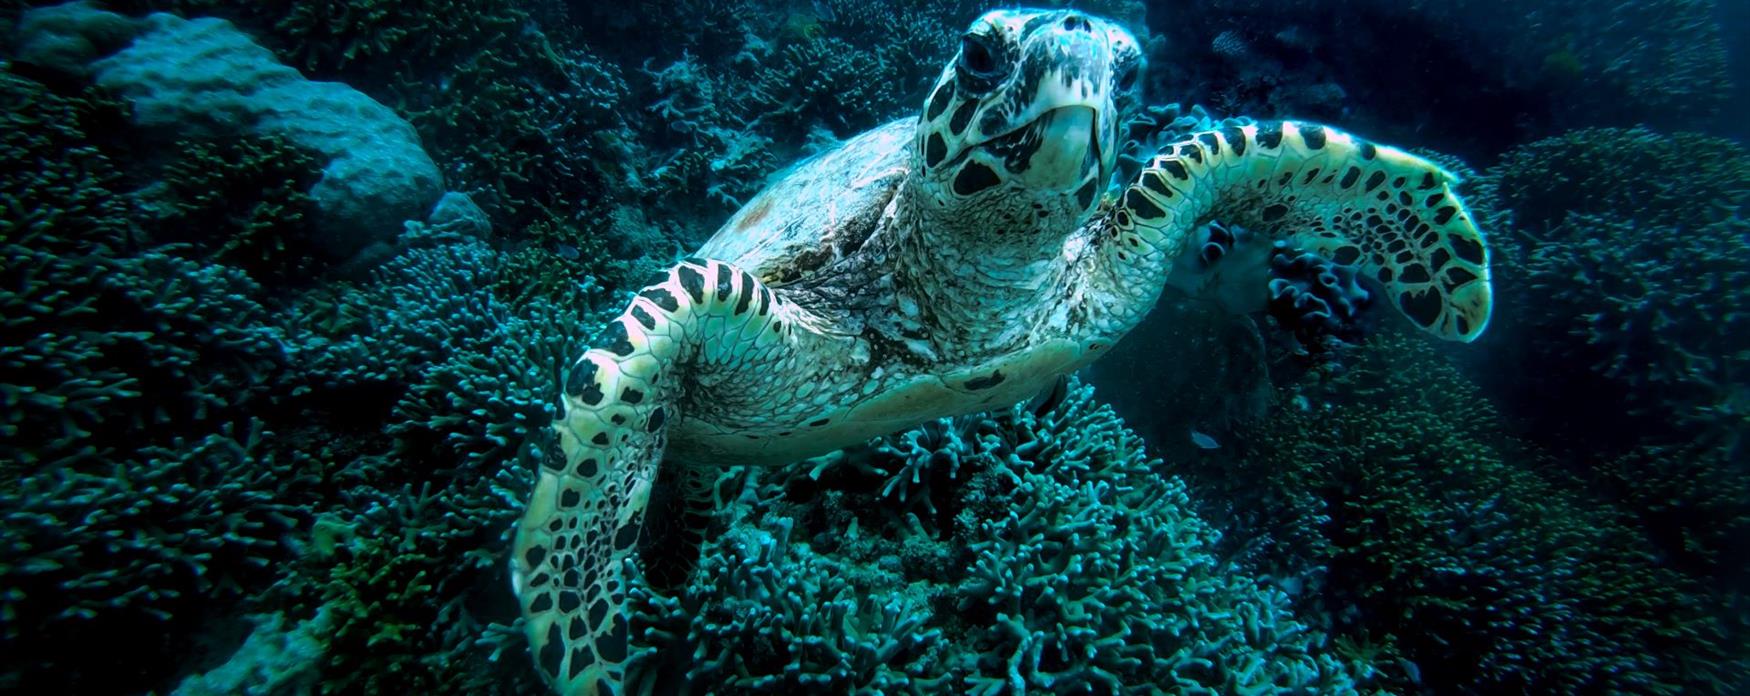 A large close up of a turtle swimming in the blue sea of the Great Barrier Reef